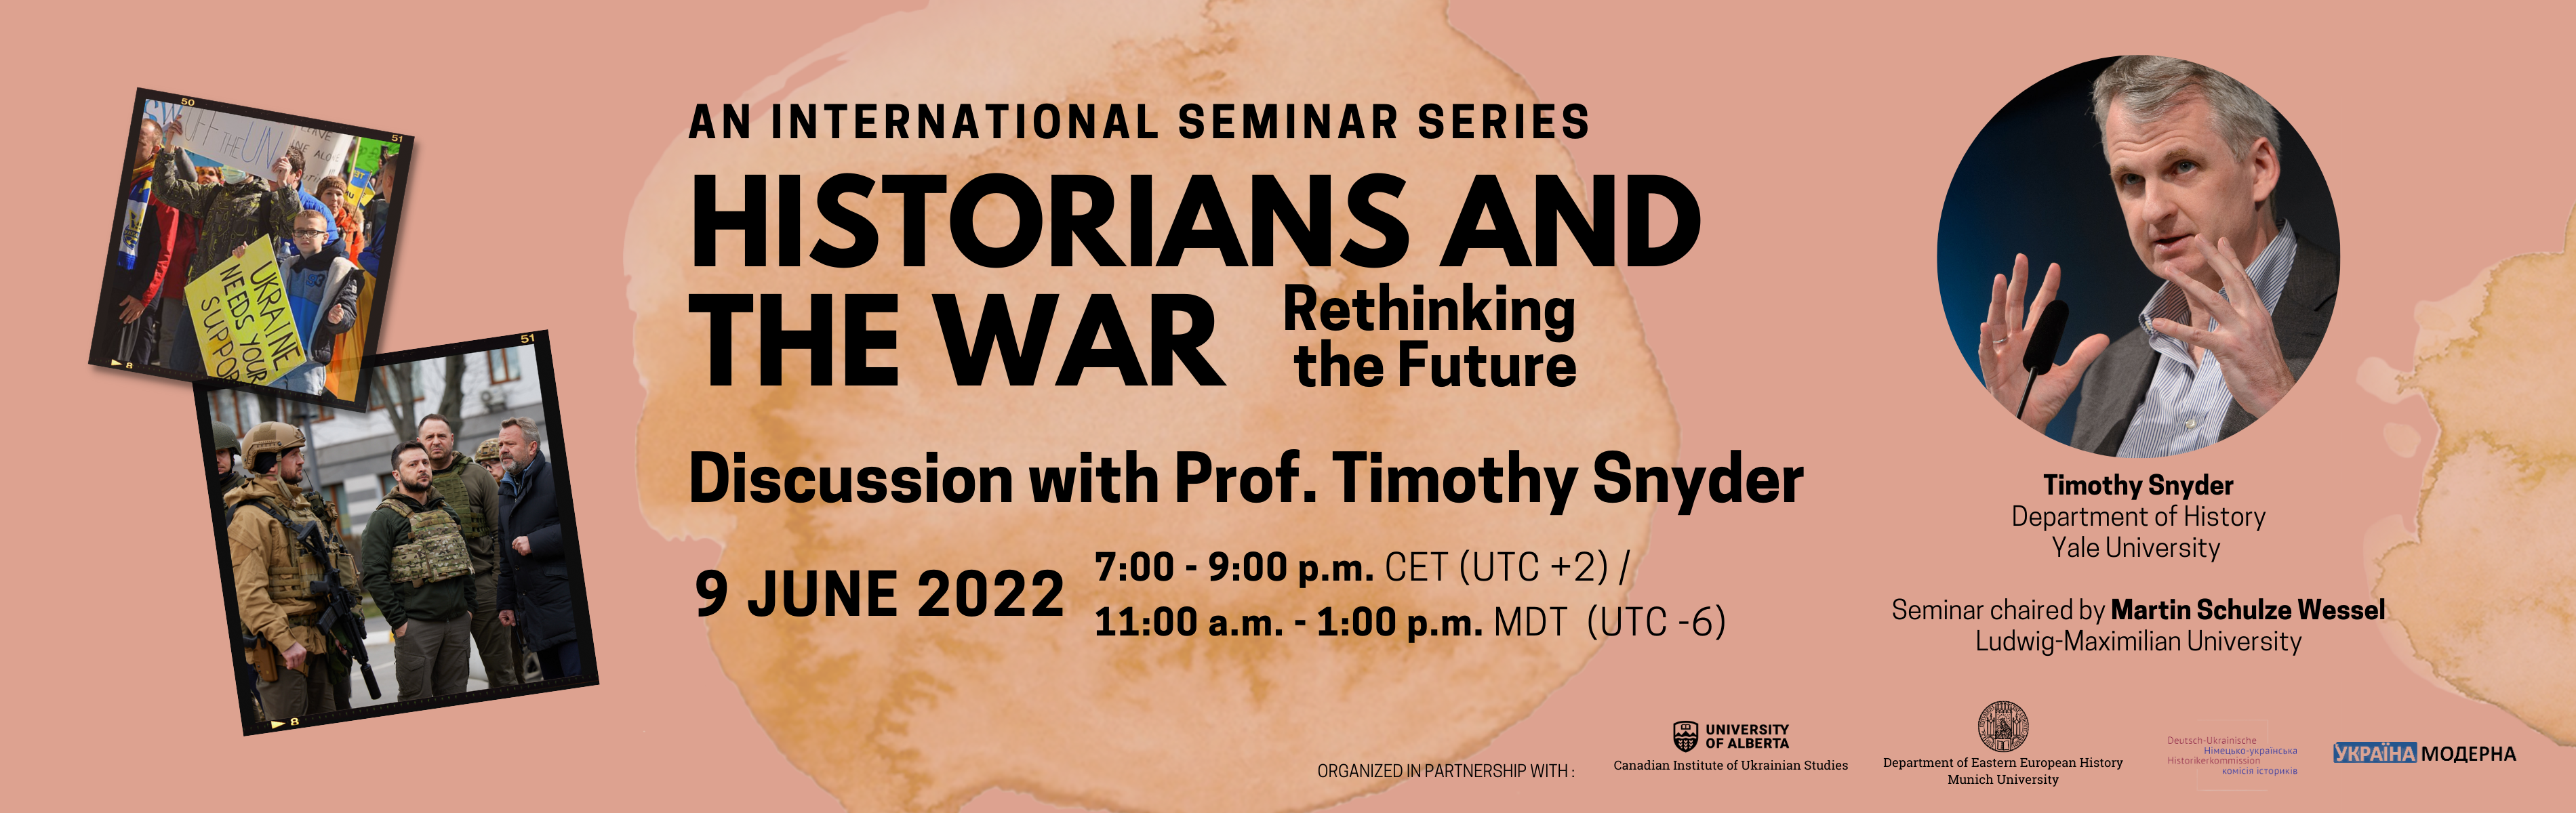 historians-and-war-seminar-snyder-simple-1.png